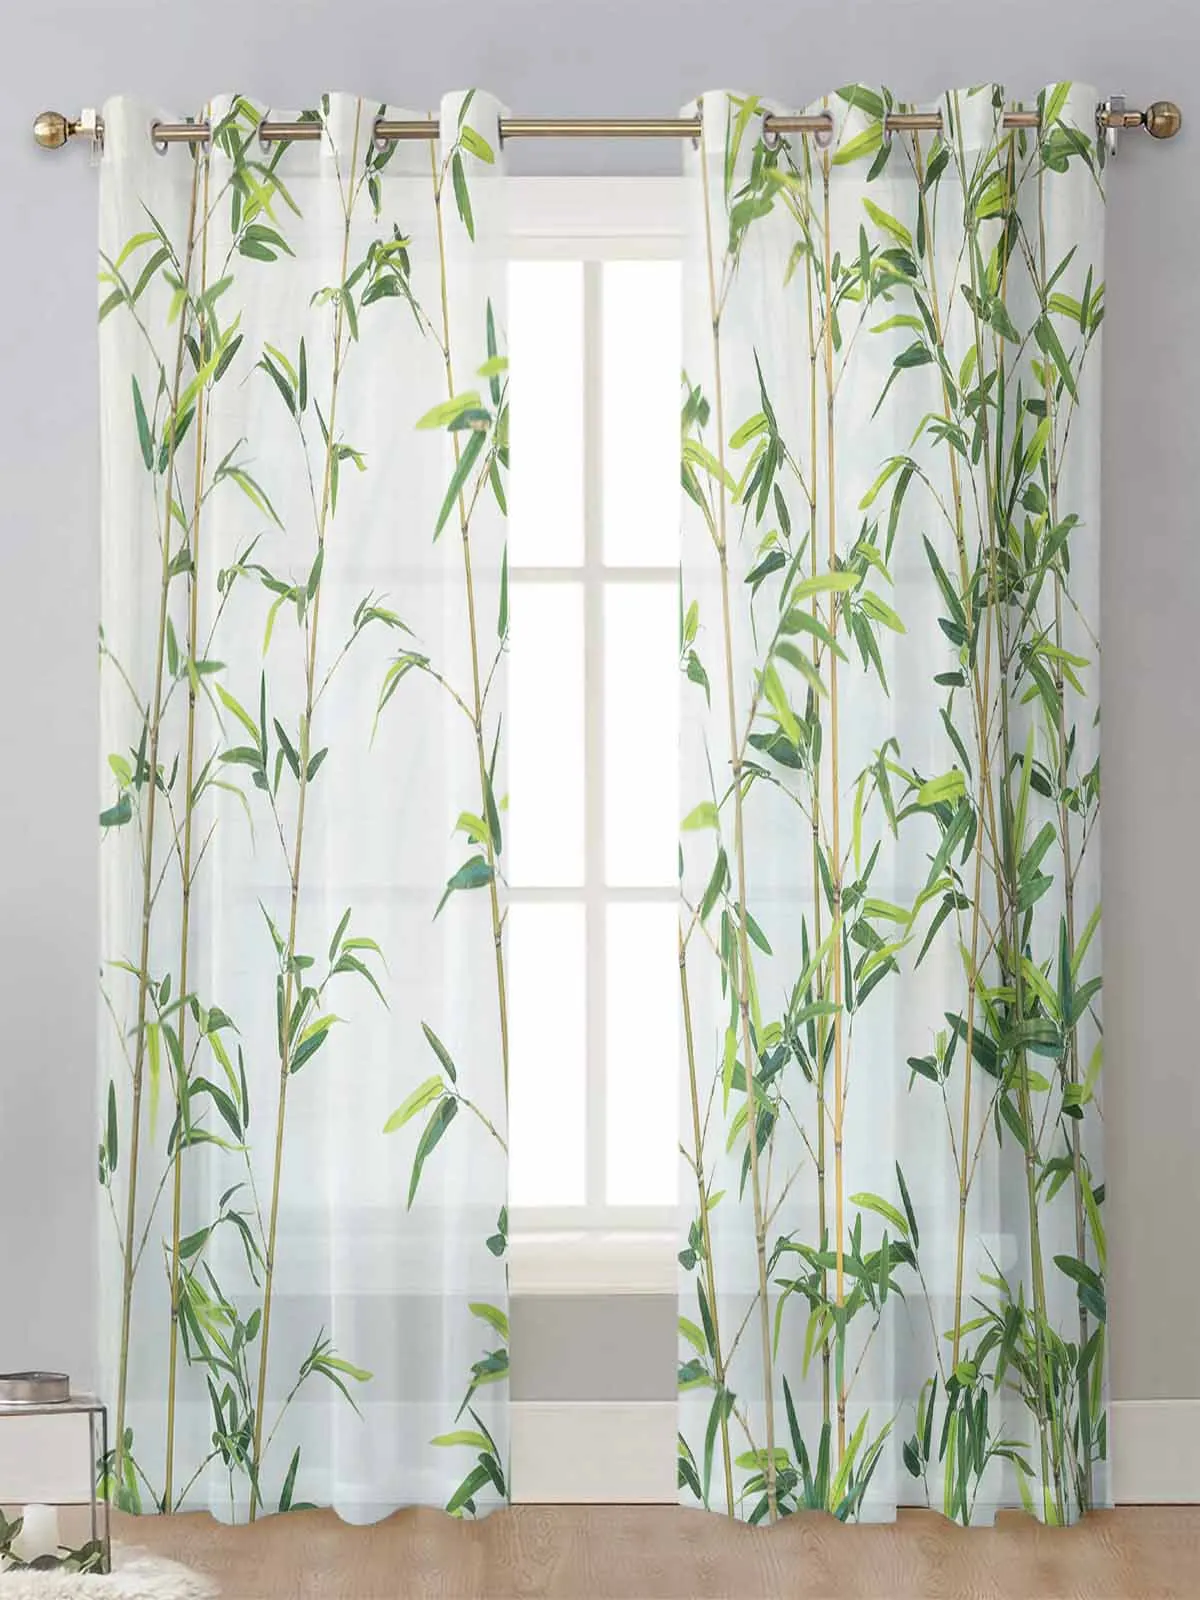 

Green Bamboo Sheer Curtains For Living Room Window Screening Transparent Voile Tulle Curtain Cortinas Drapes Home Decor